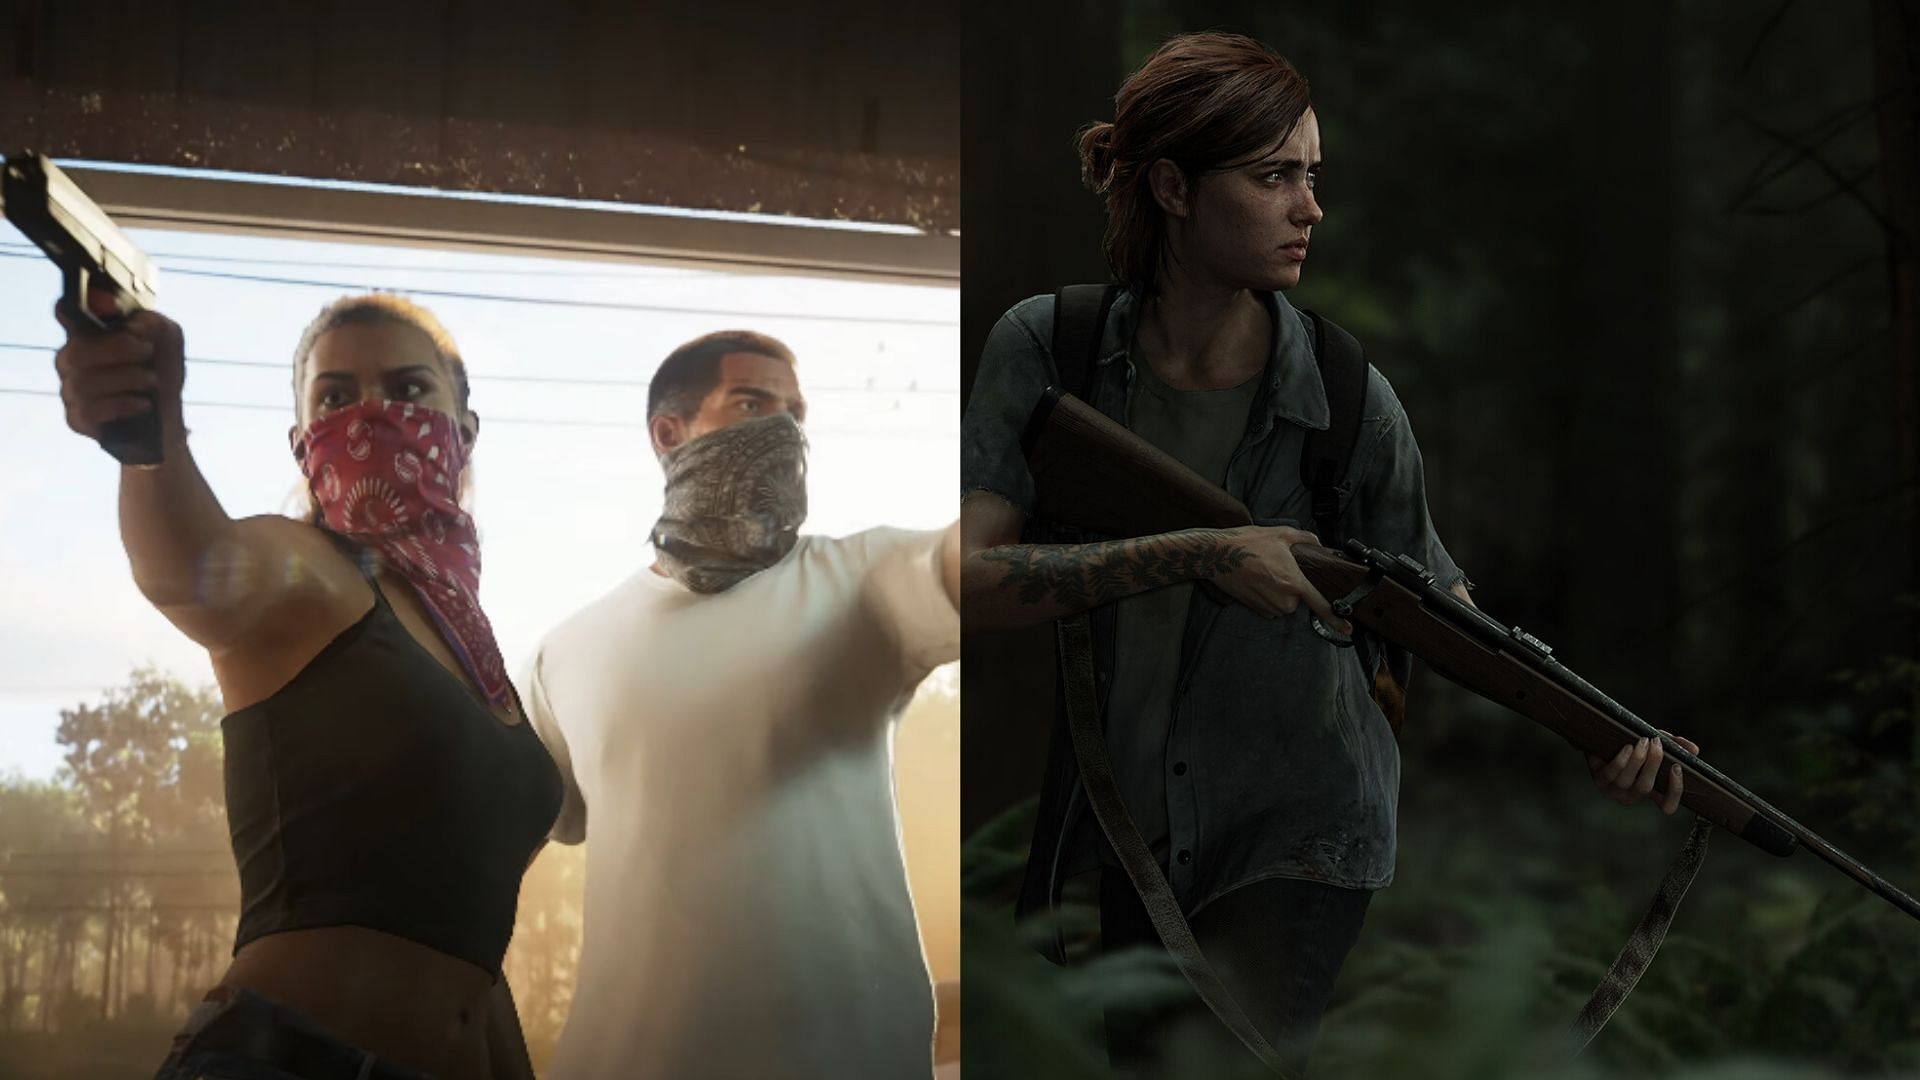 Fans think GTA 6 could have better shooting mechanics than The Last Of Us Part 2 (Images via Rockstar Games, Naughty Dog)